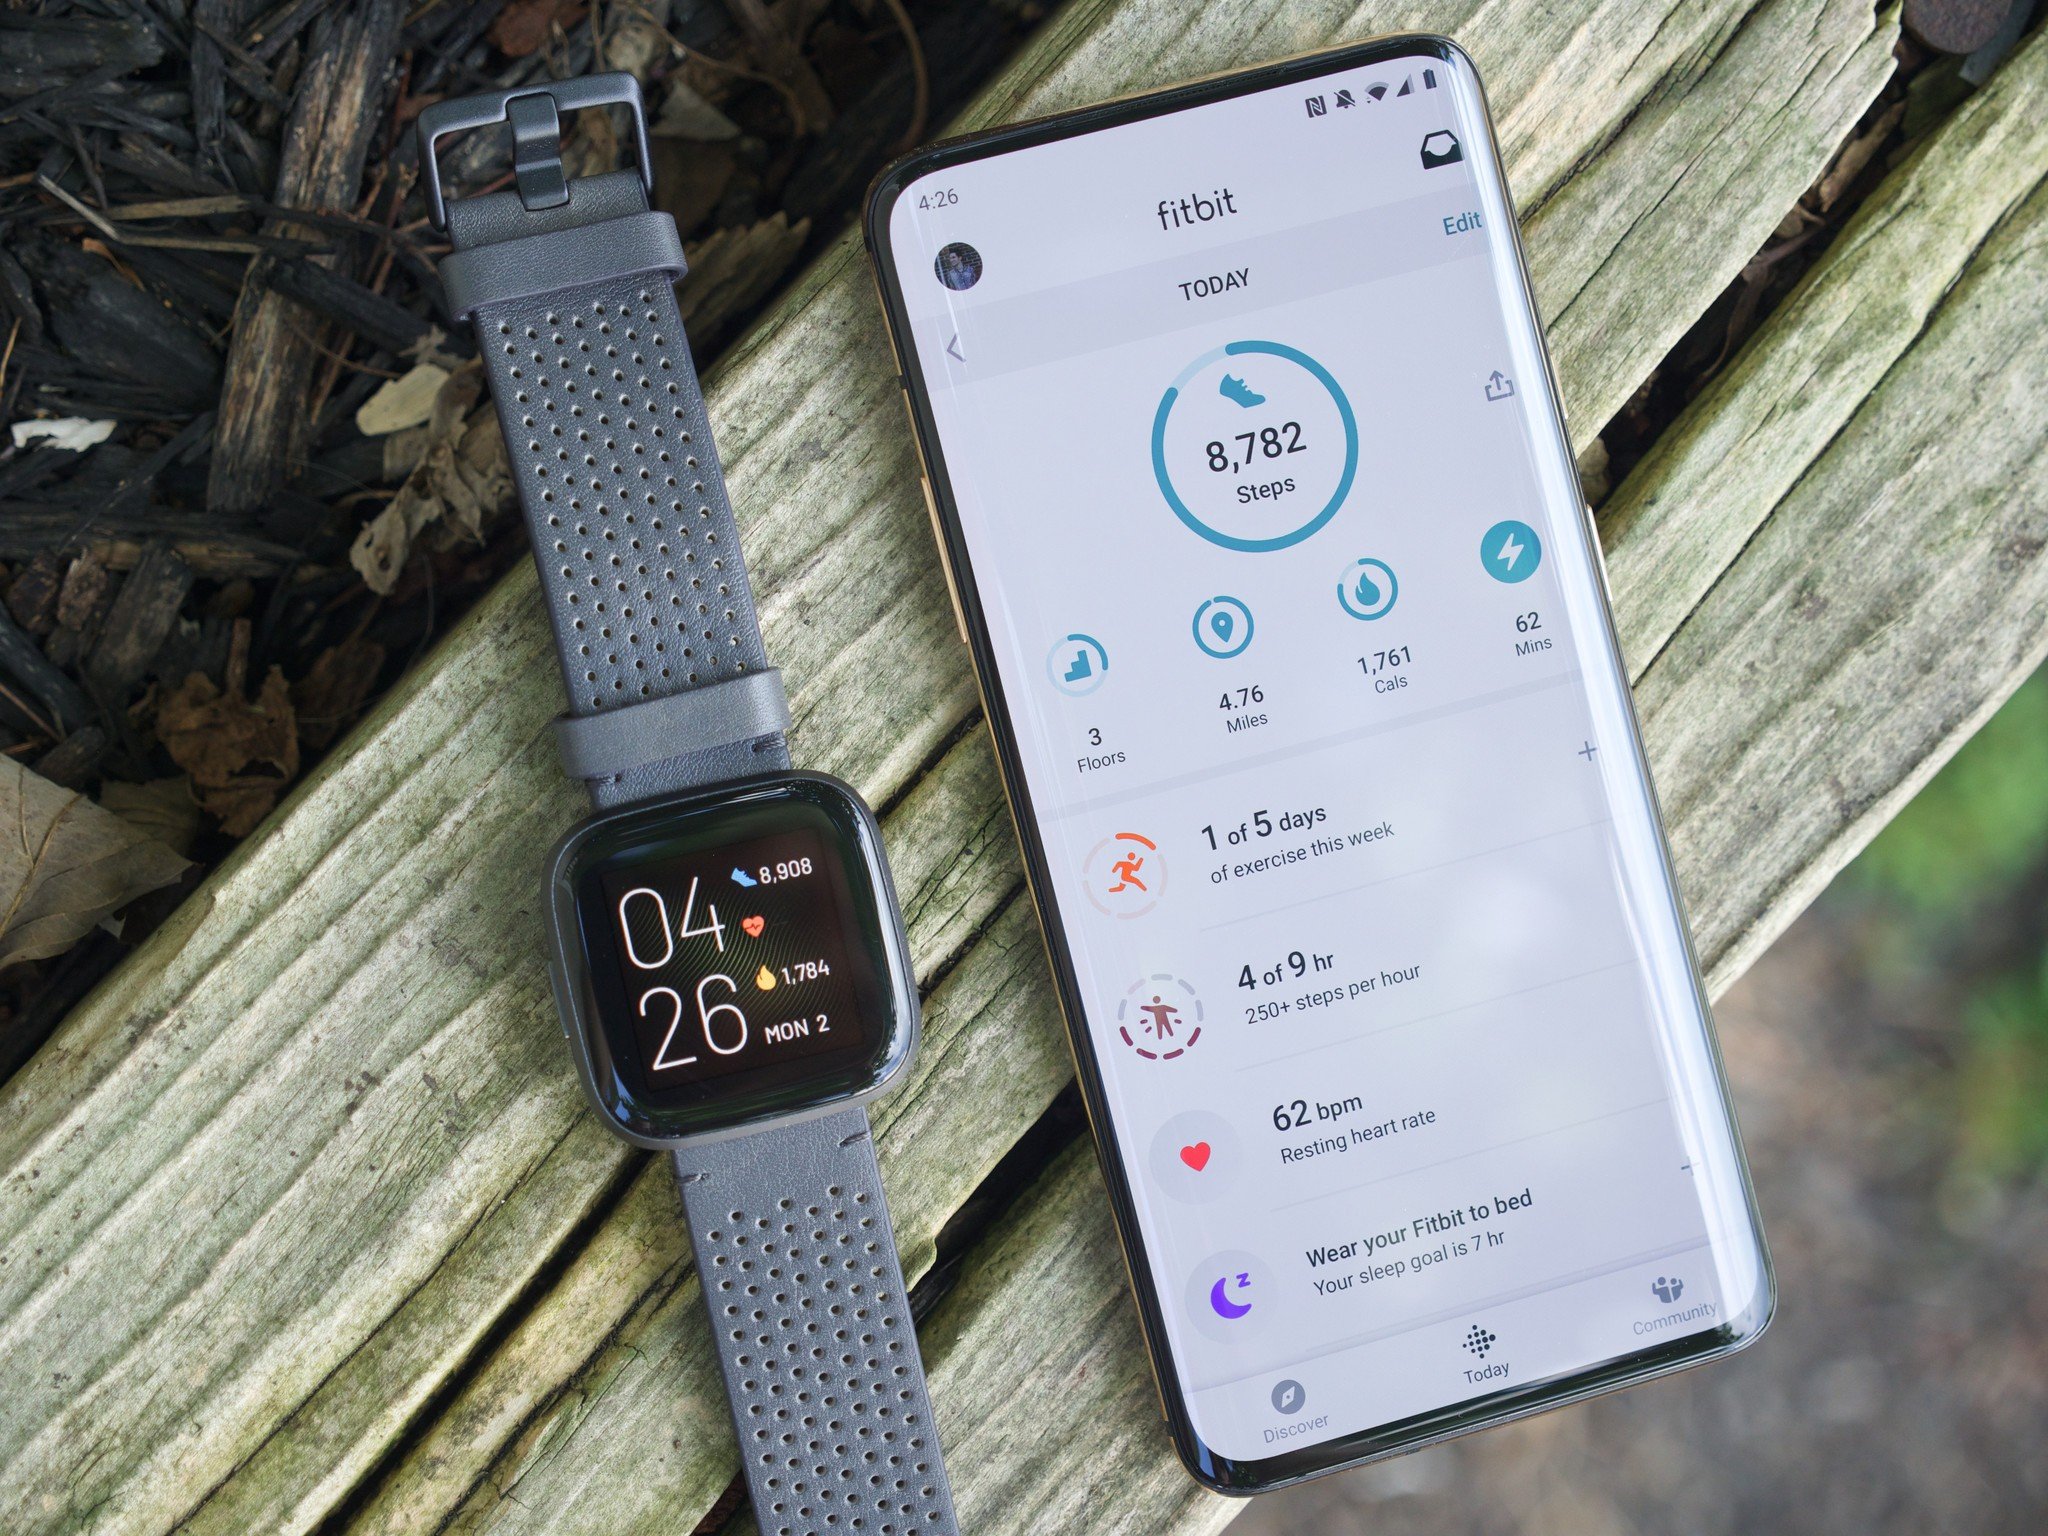 Fitbit Versa 2 next to a OnePlus 7 Pro running the Fitbit mobile app